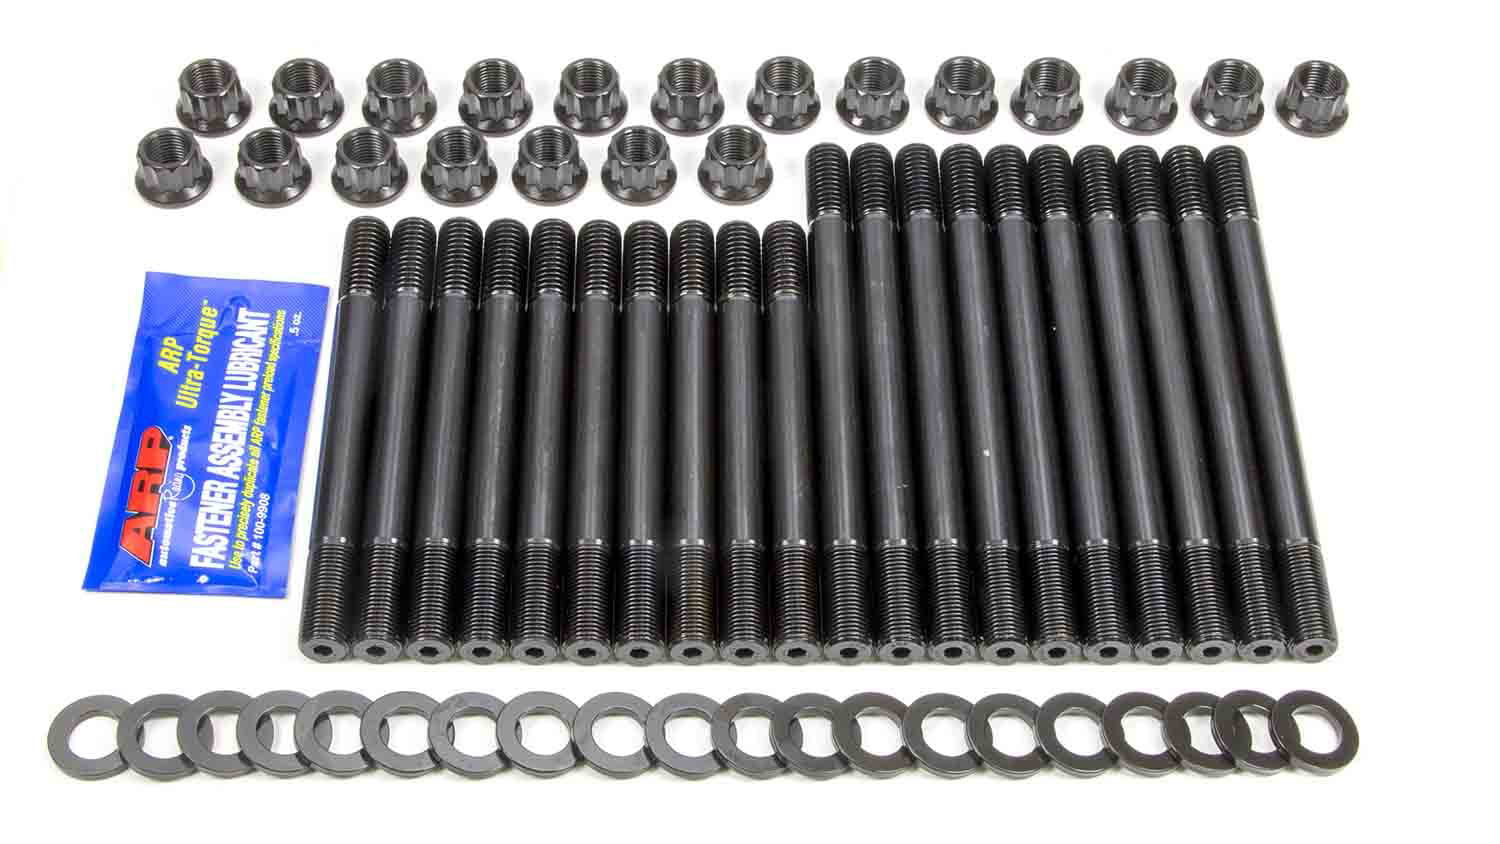 ARP 255-4304 12-Point Head Stud Kit for Big Block Ford 